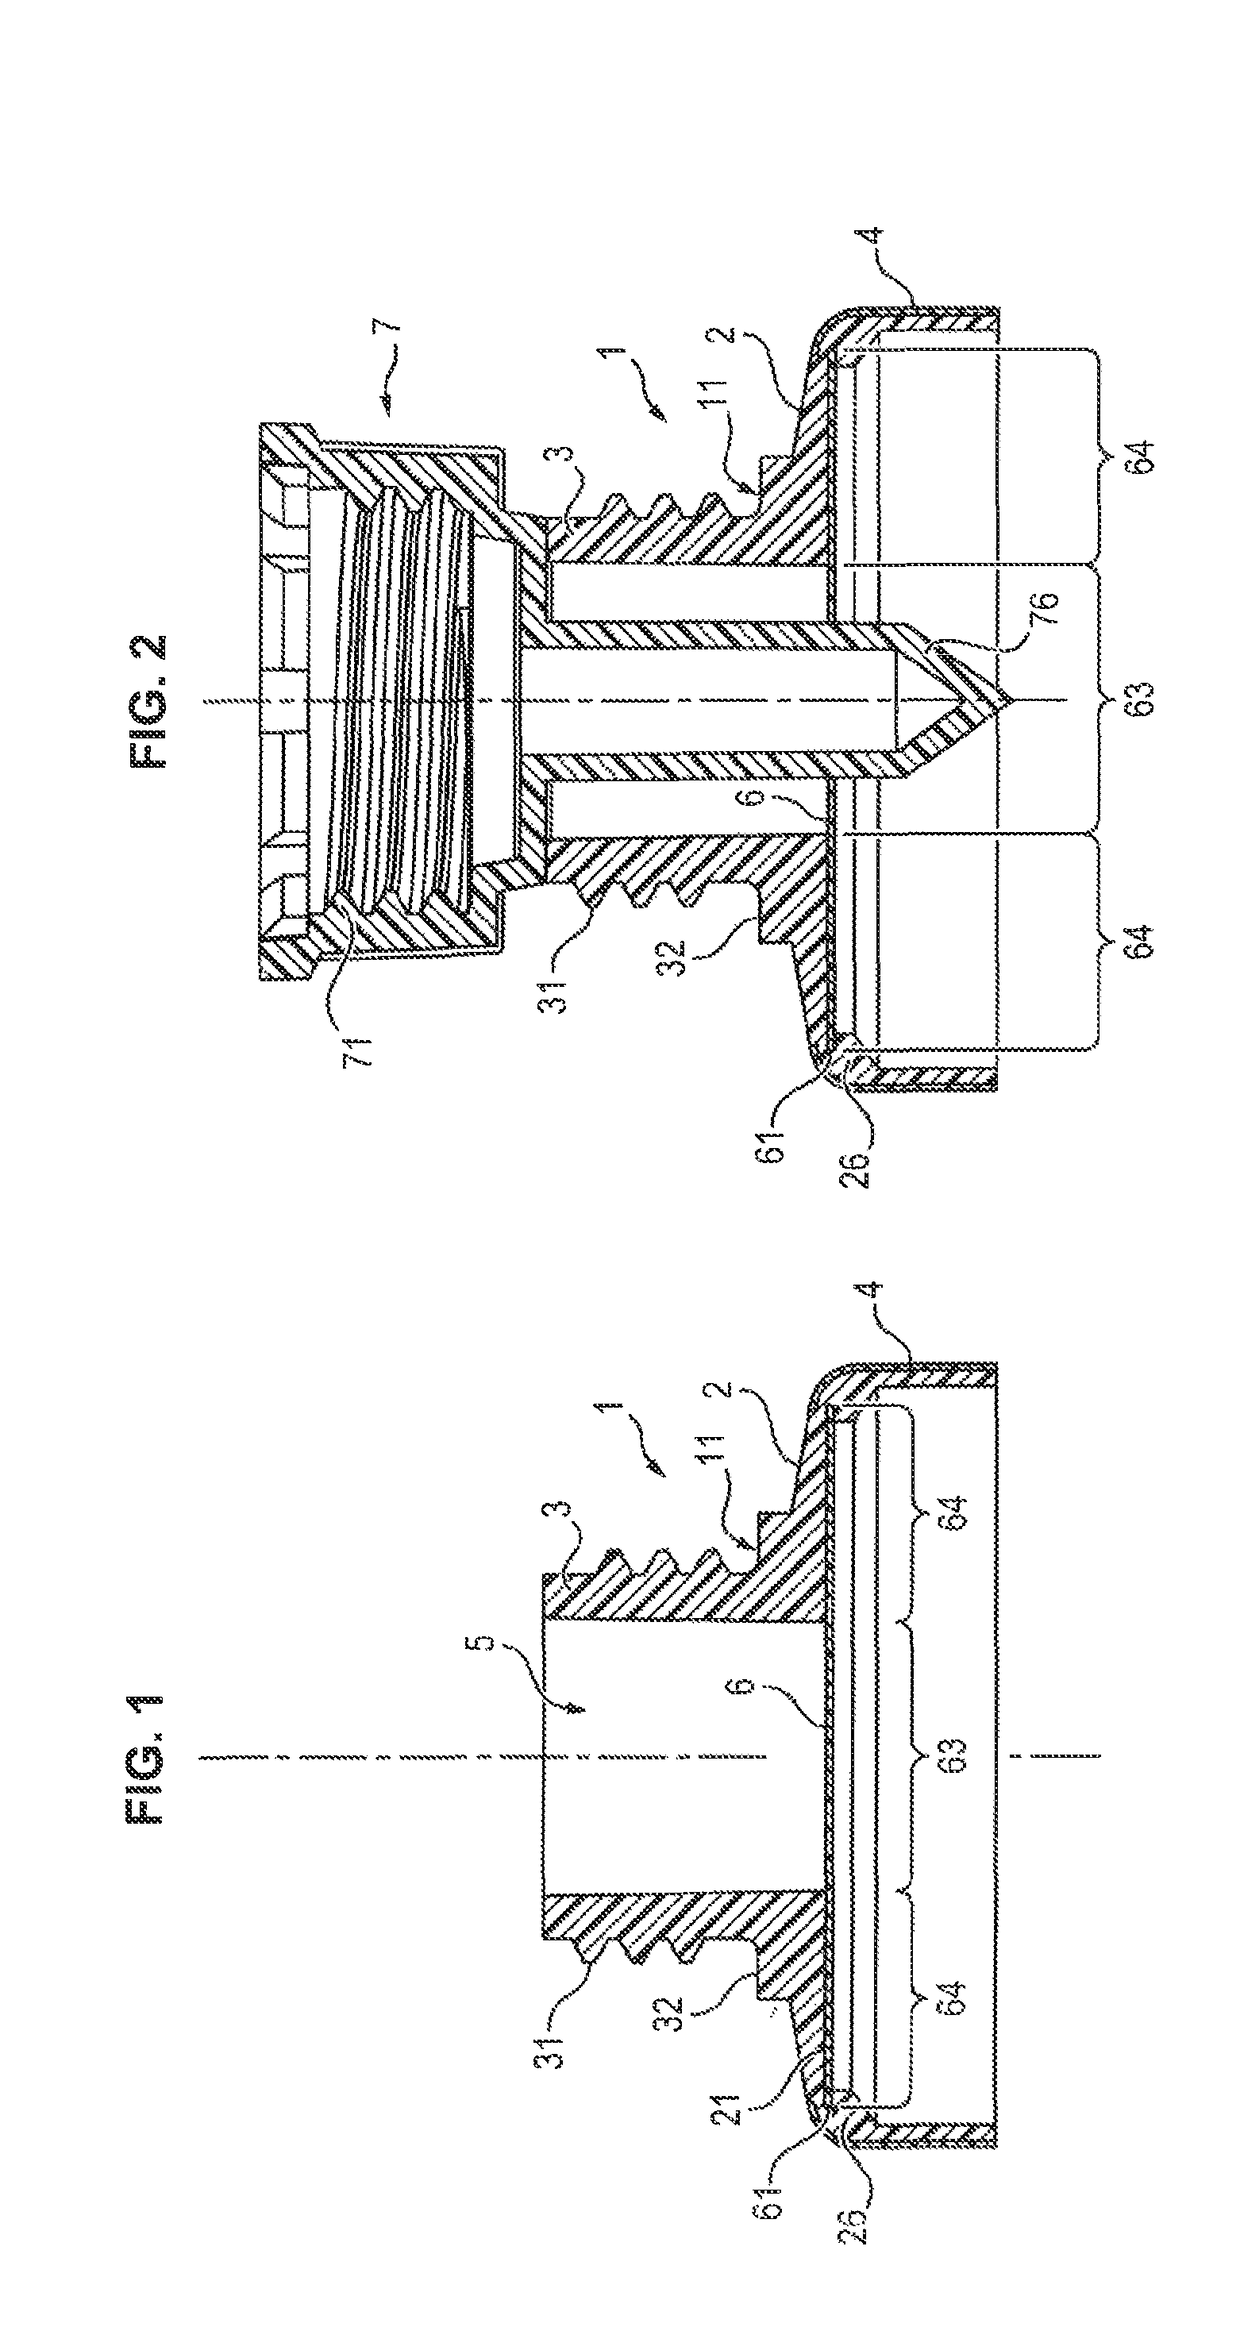 Tube head with insert forming a barrier